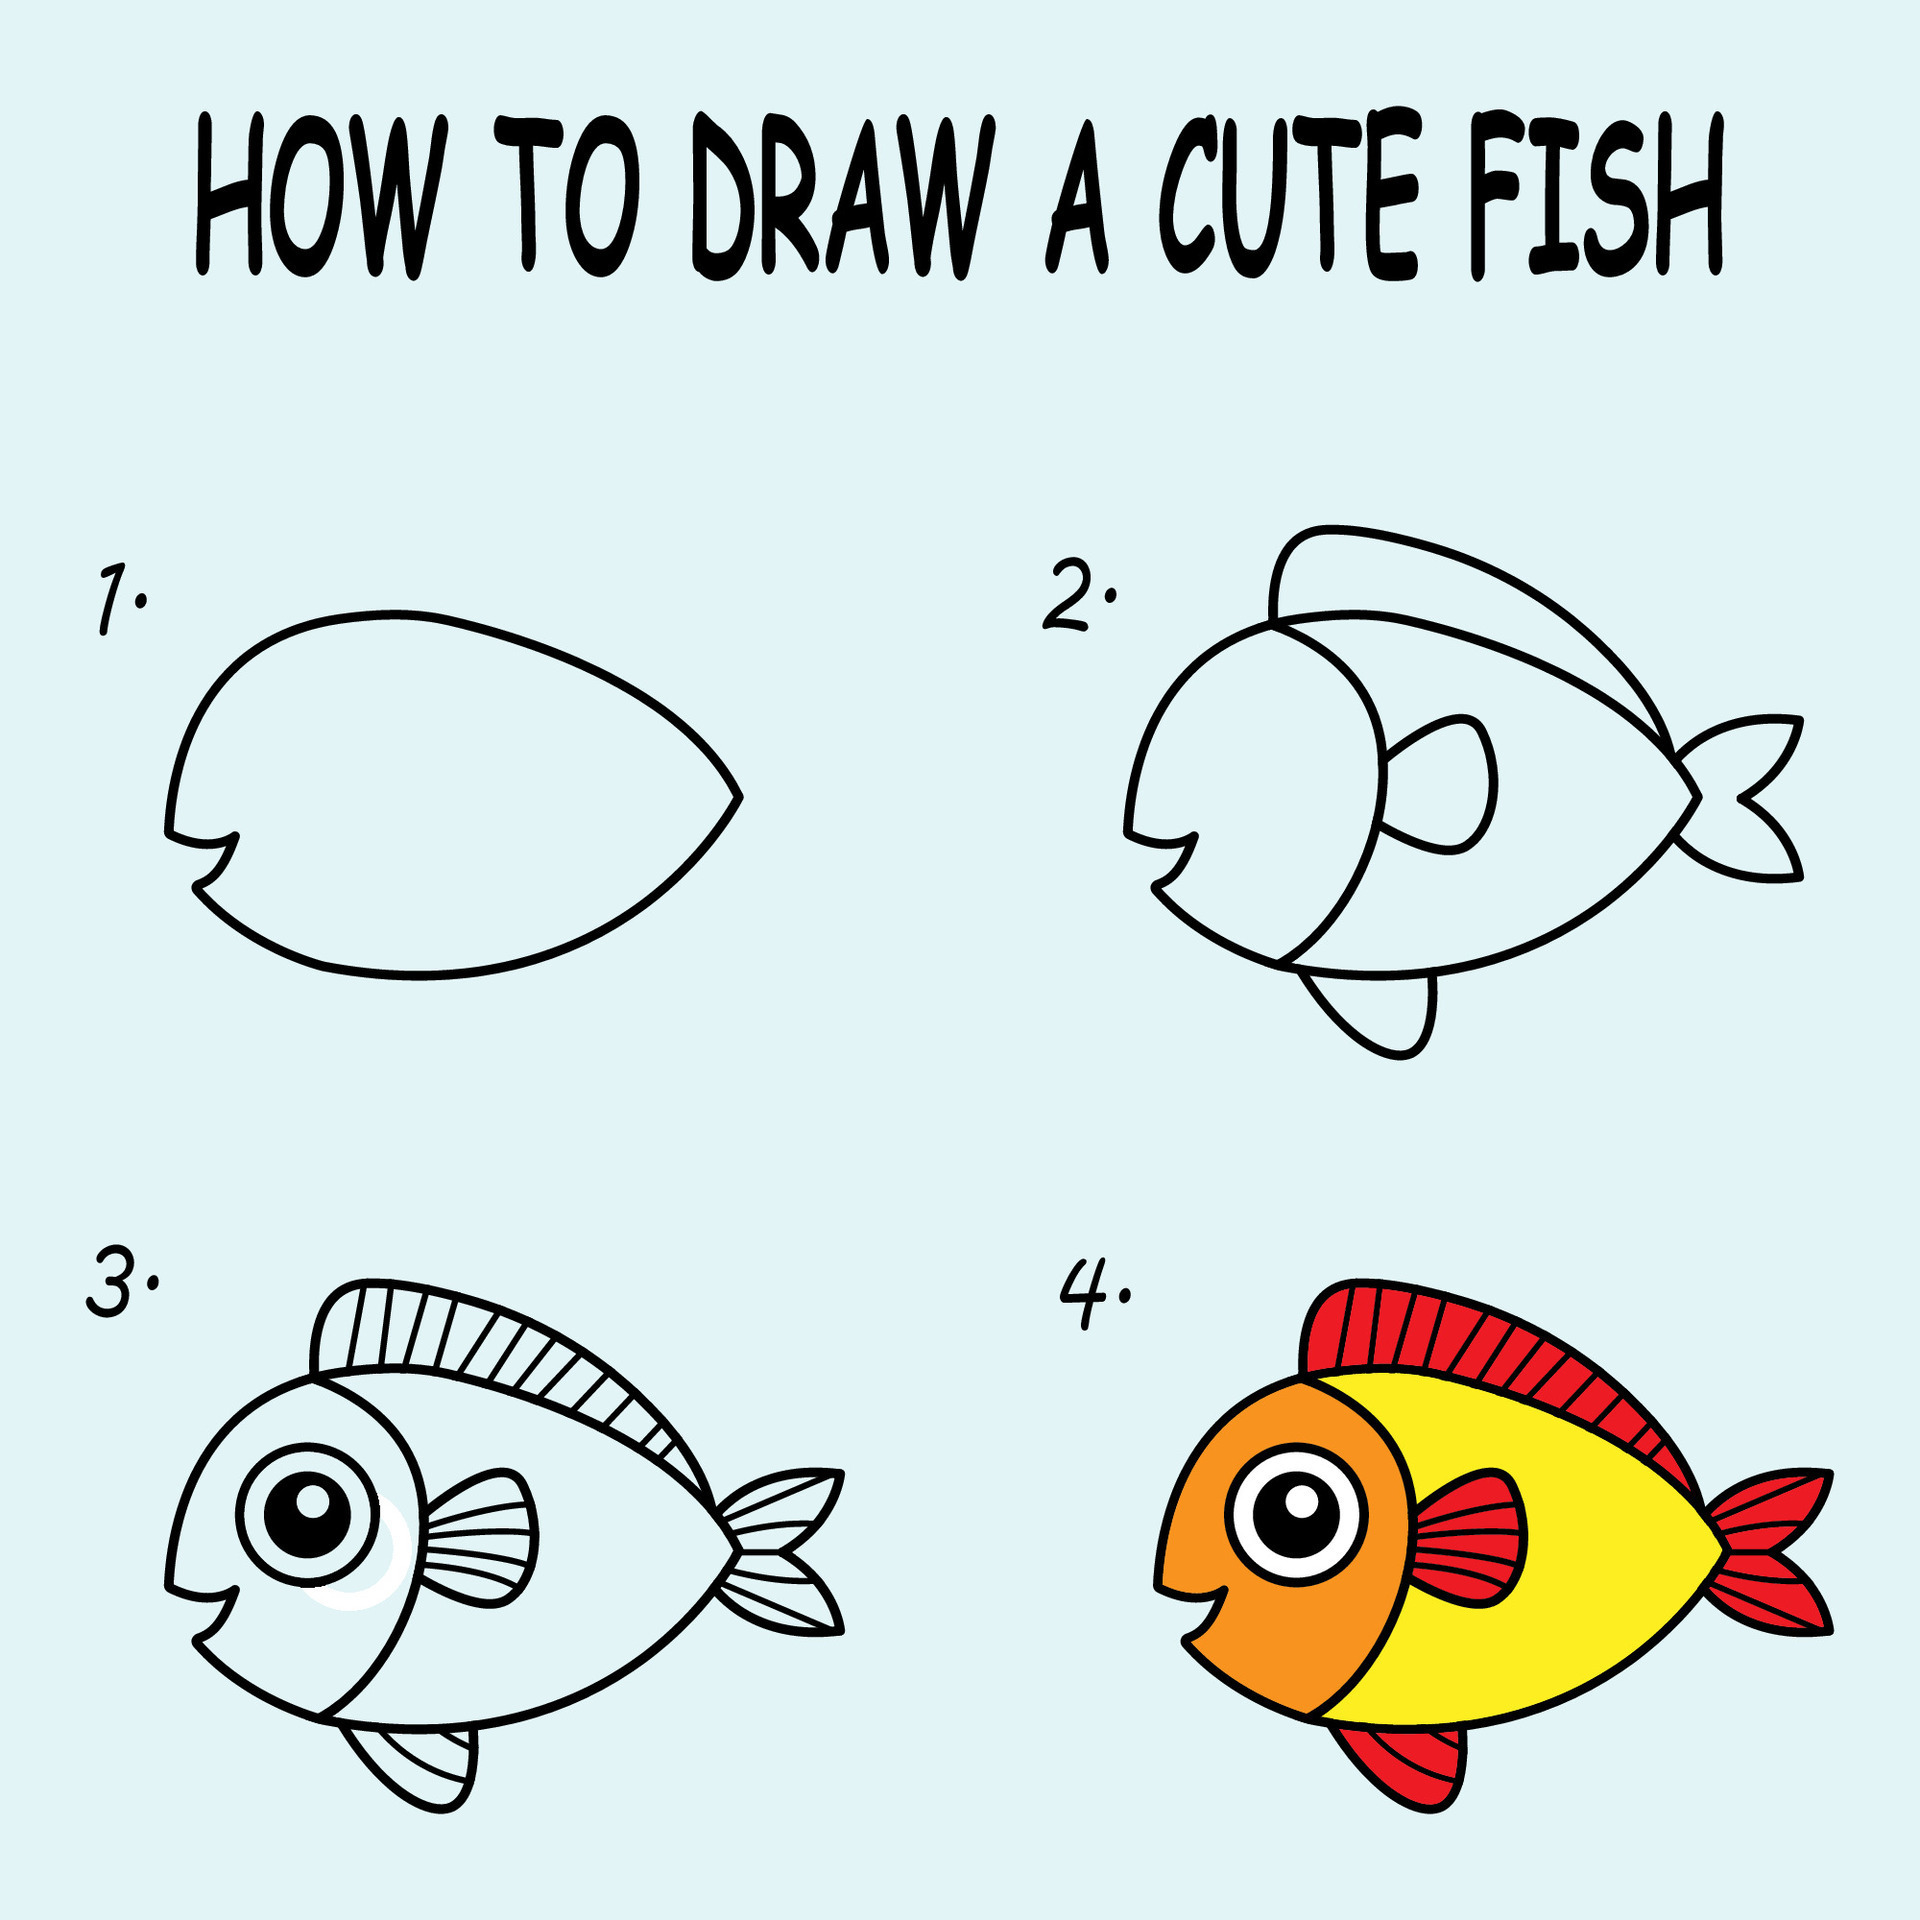 25 Easy Fish Drawing Ideas - How to Draw a Fish-saigonsouth.com.vn